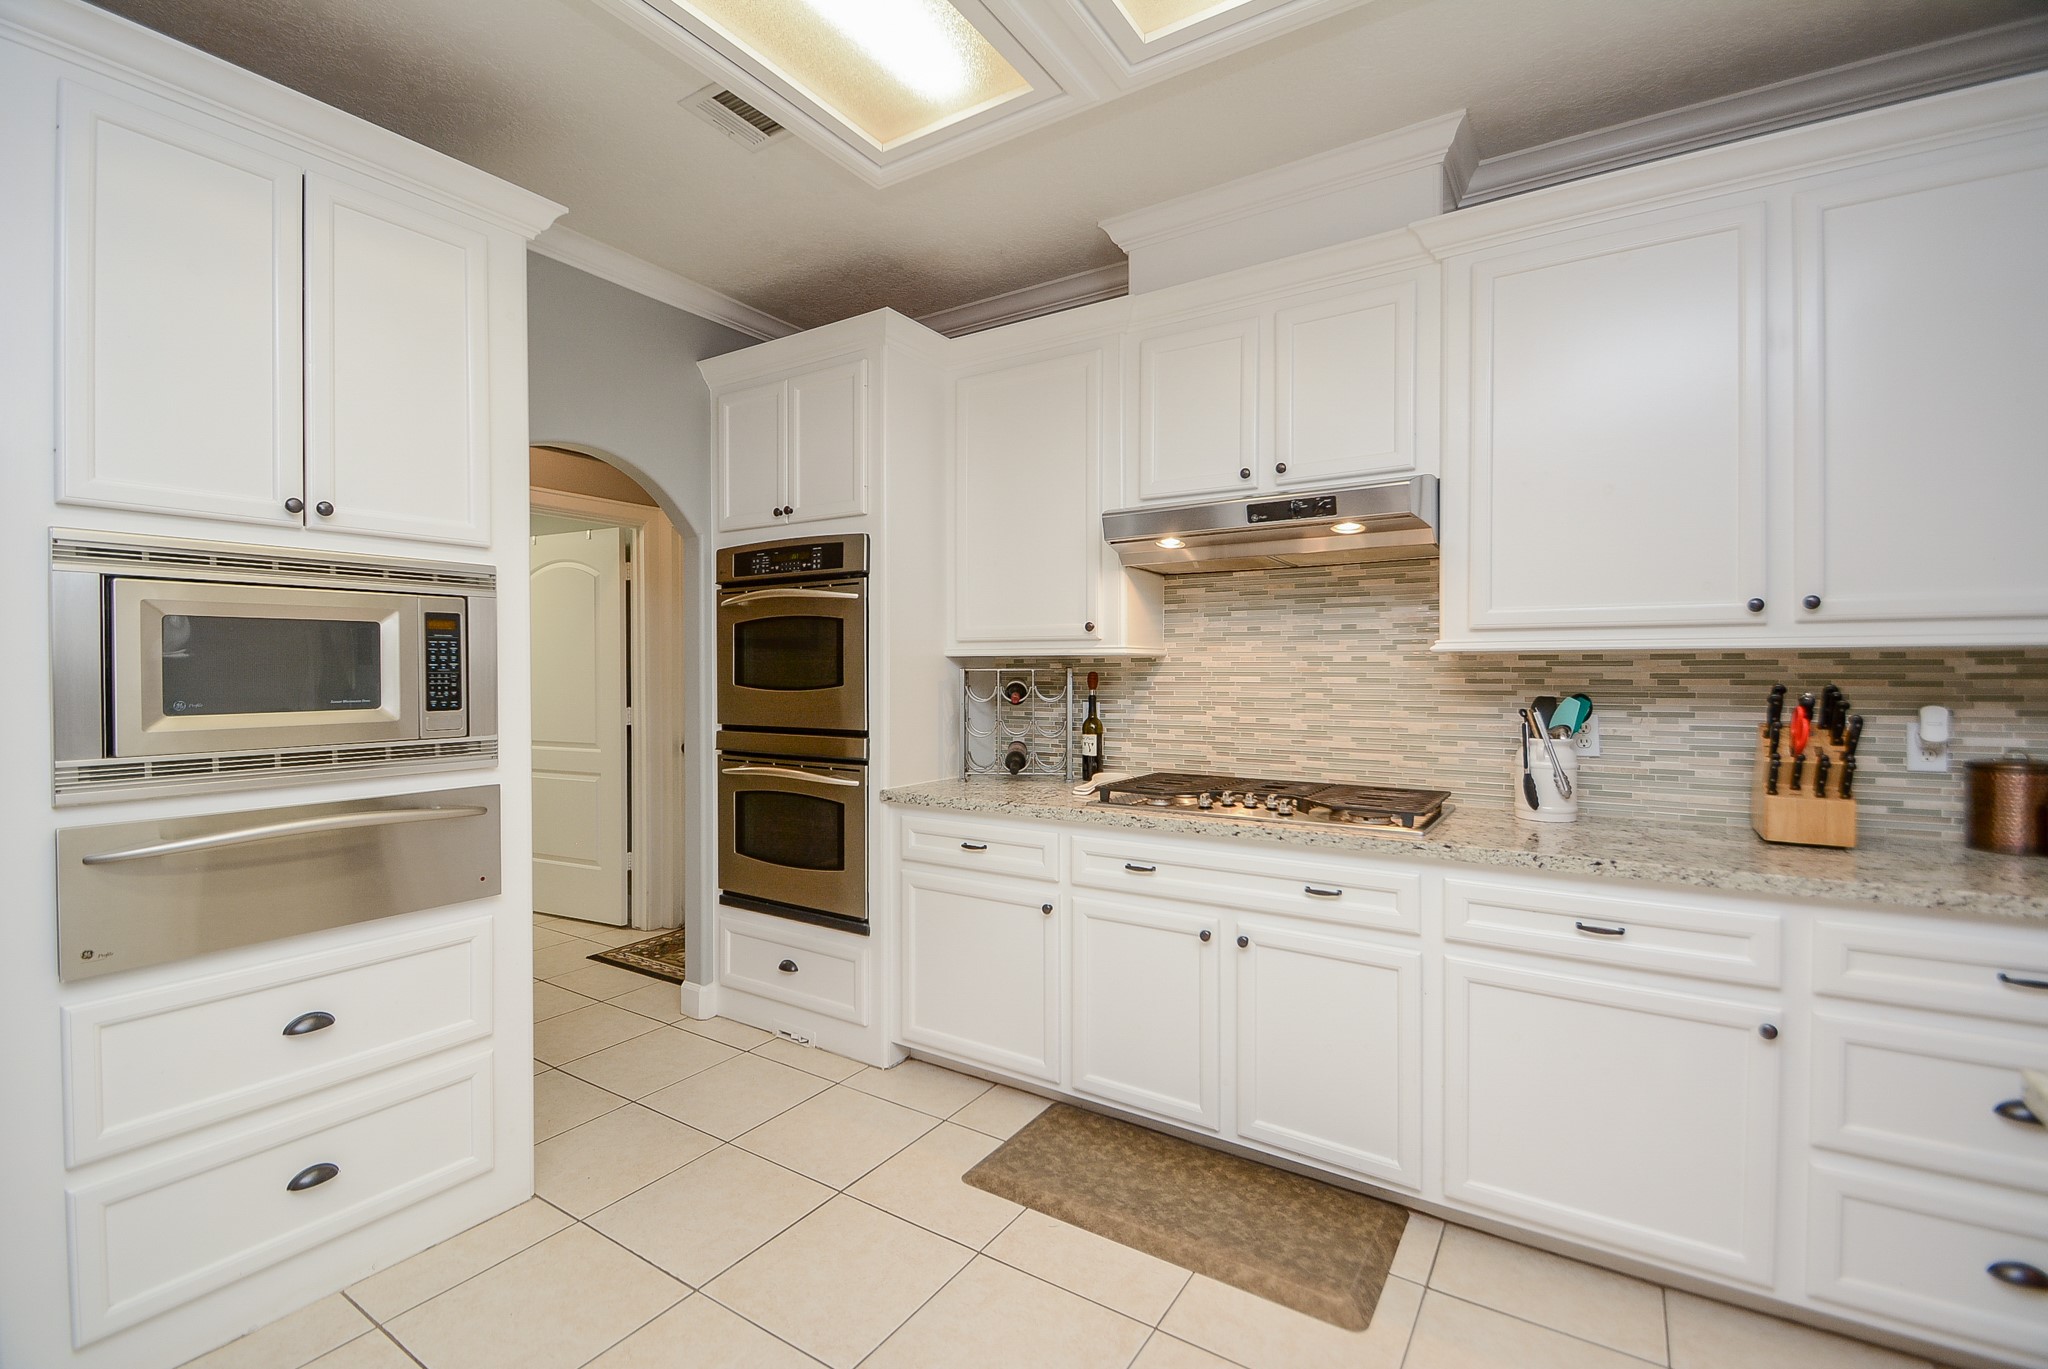 Kitchen with Granite Countertops, Stainless Steel Appliances, Double Convection Oven, Gas Cooktop, Built-In Microwave, Warming Drawer, Under-Counter Lighting, Dishwasher & Double Stainless Steel Sink.